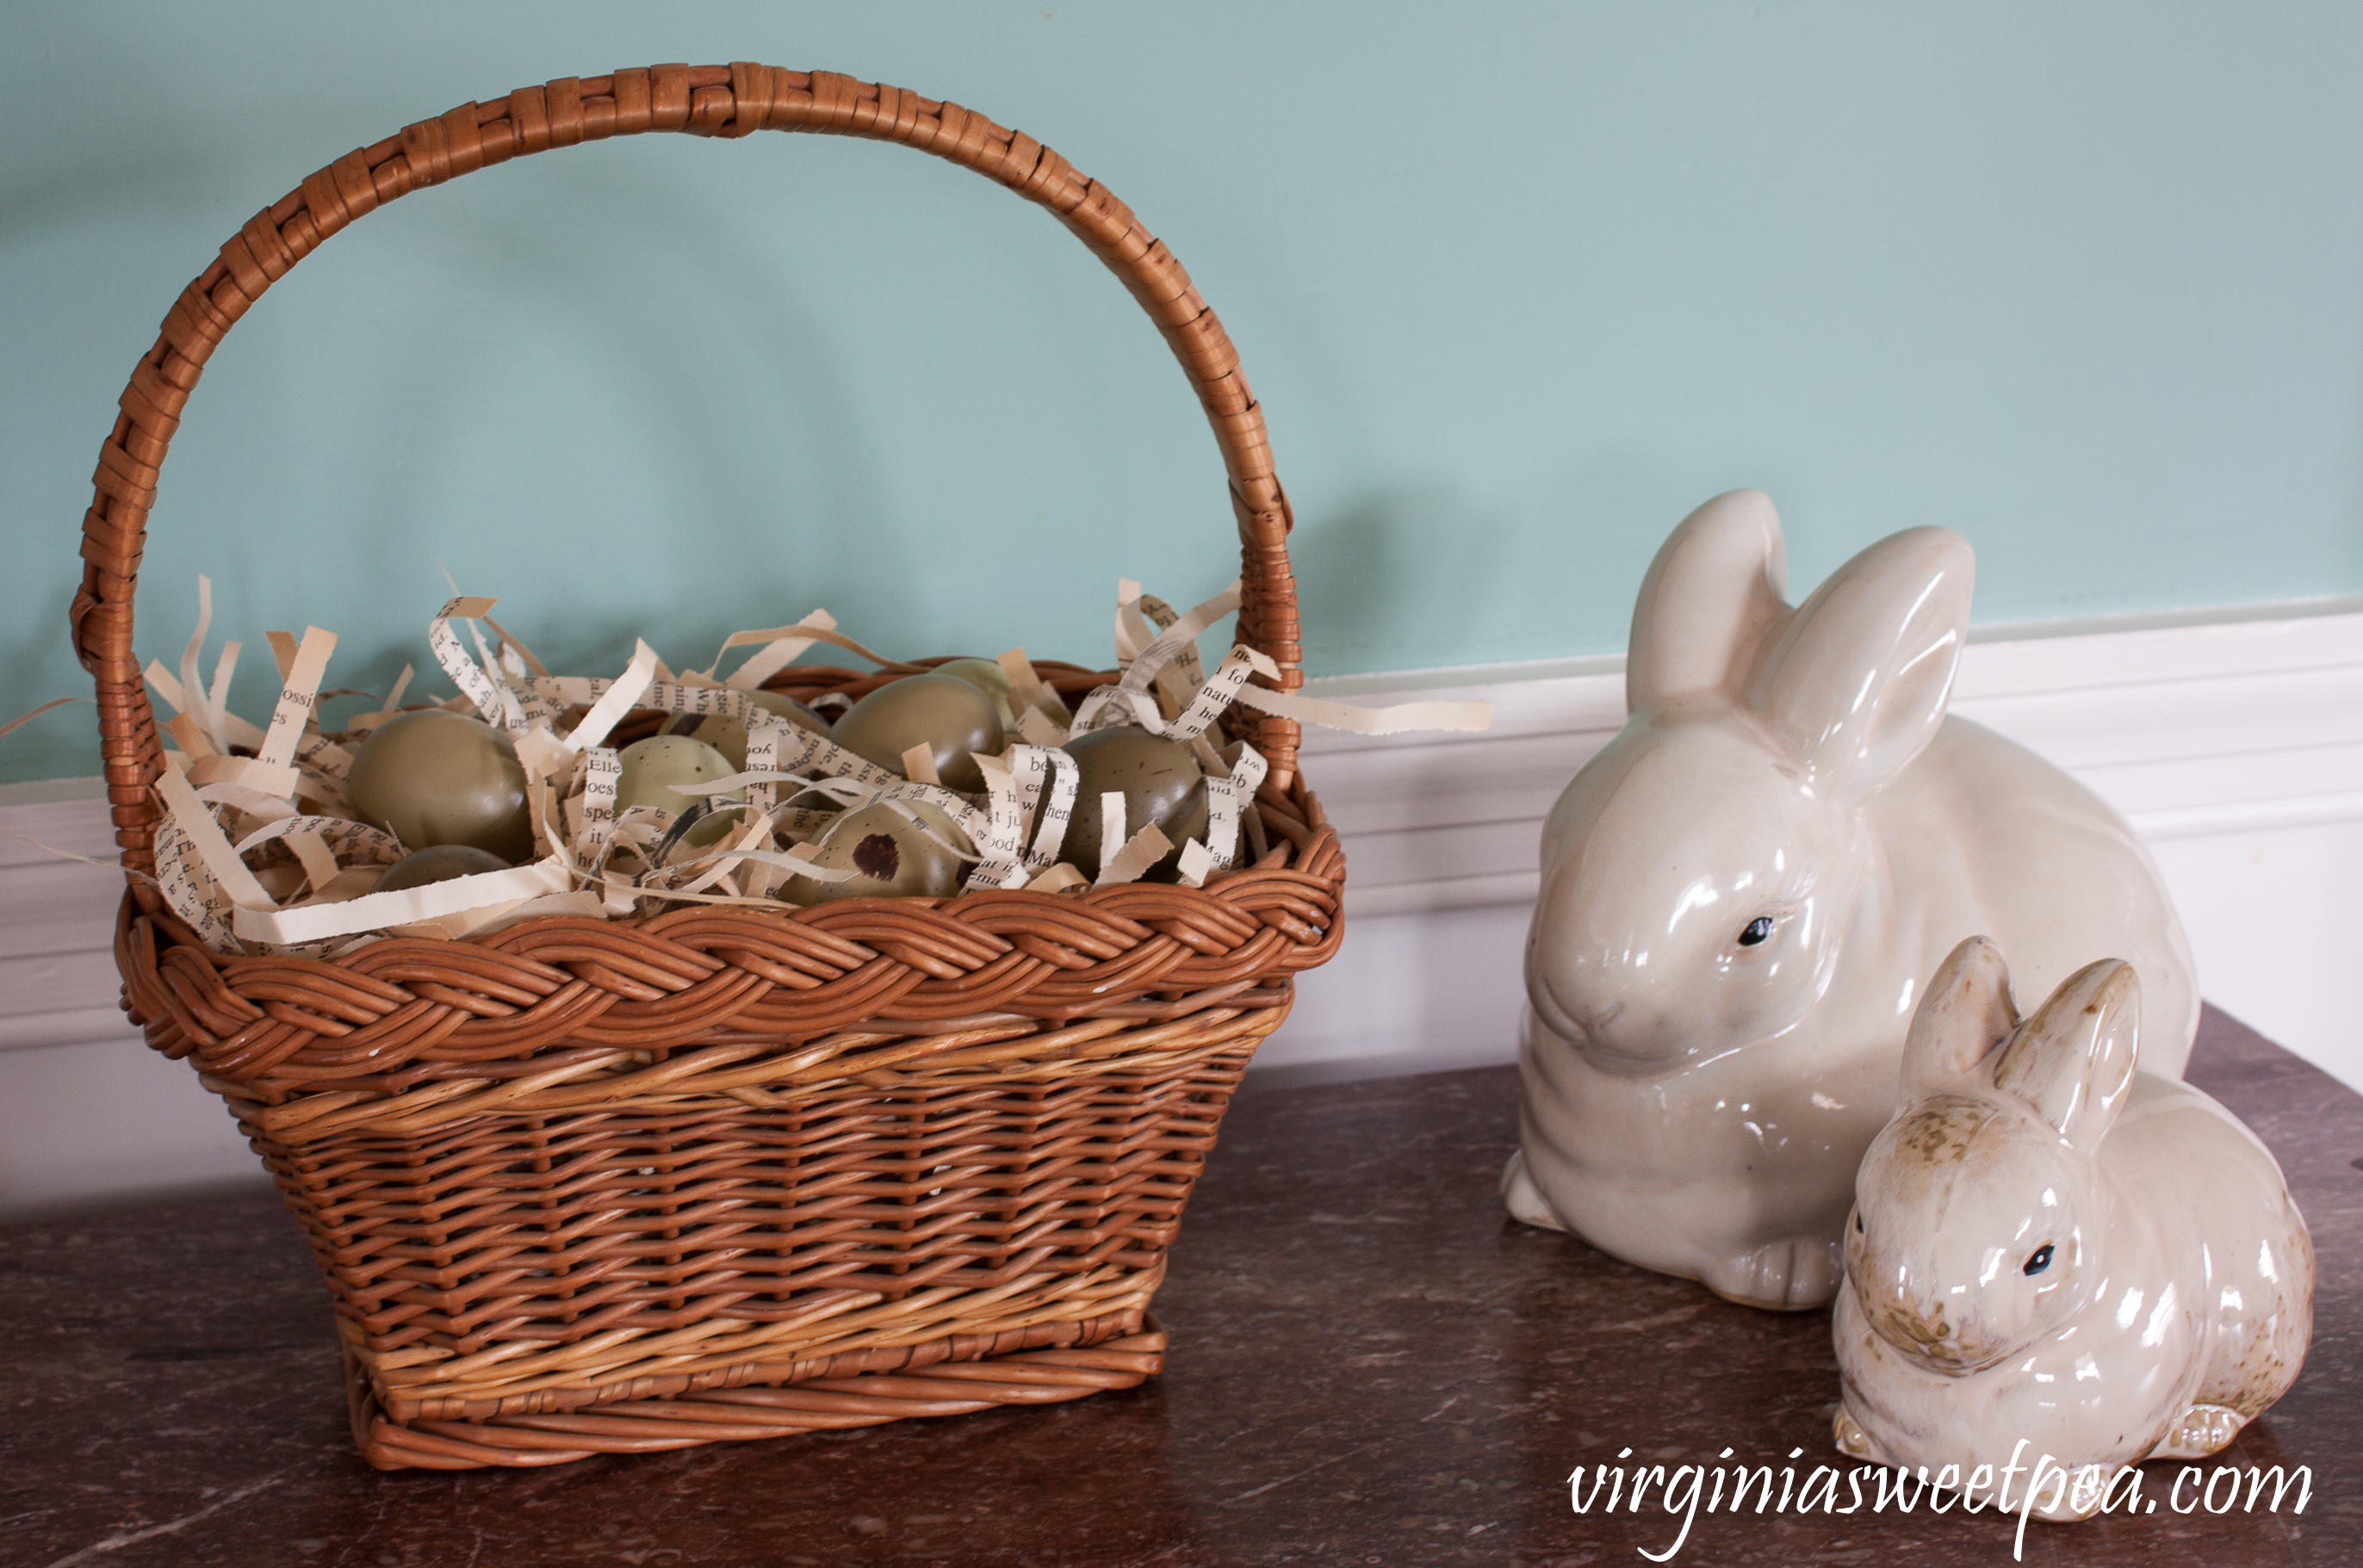 Easter Decor - Rabbits with a basket filled with shredded book pages and eggs